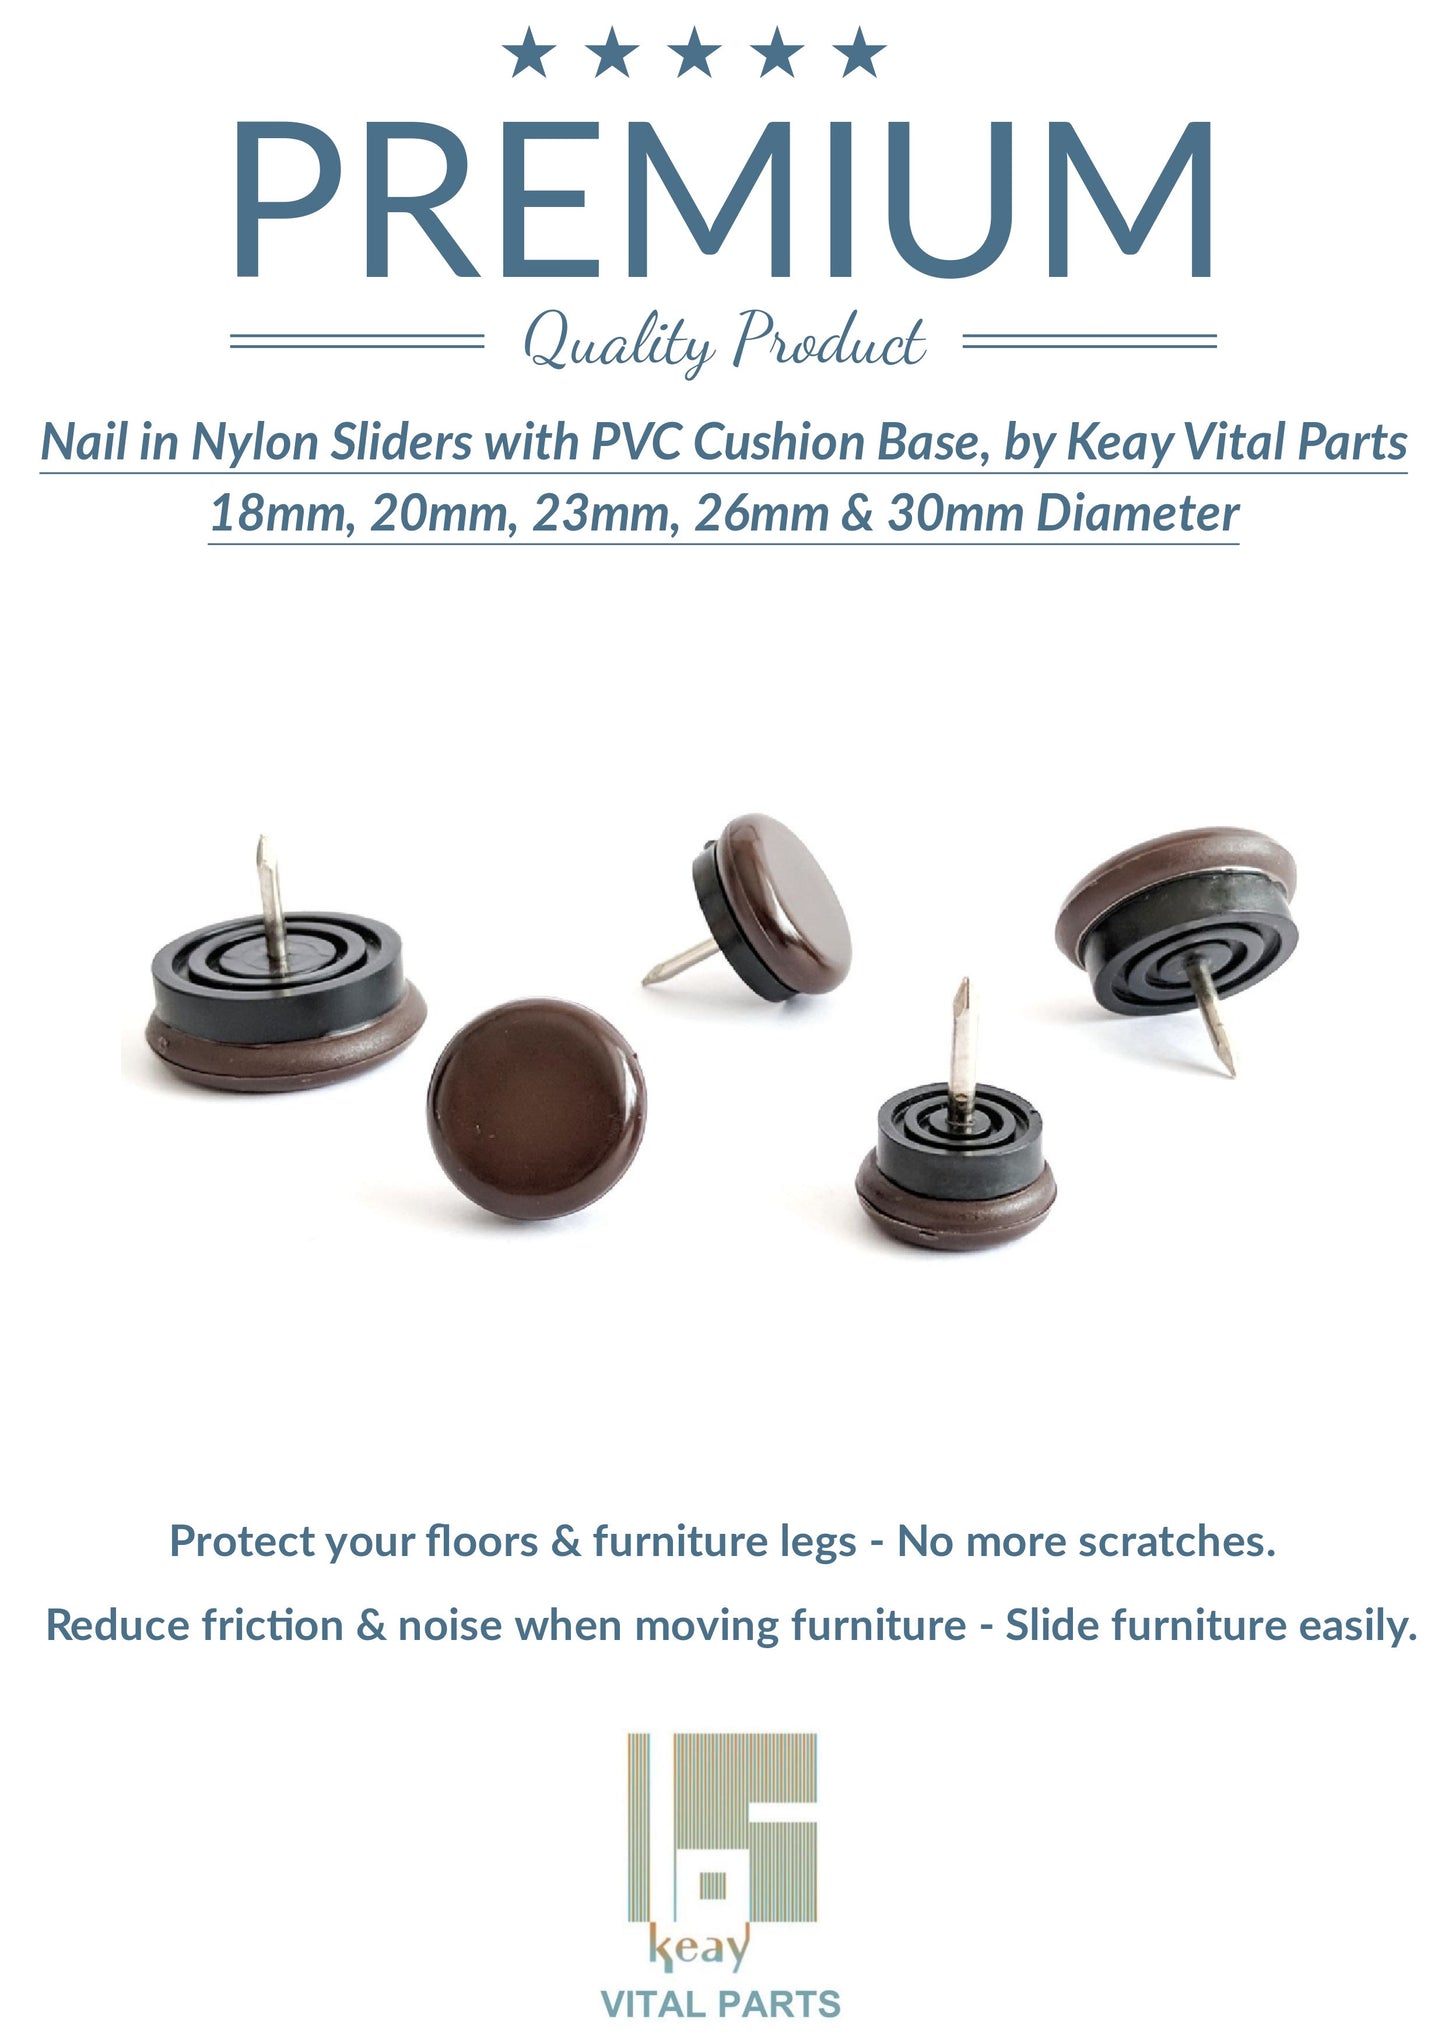 20mm Nylon Furniture Gliders Nail in Brown  - Made in Germany - Keay Vital Parts